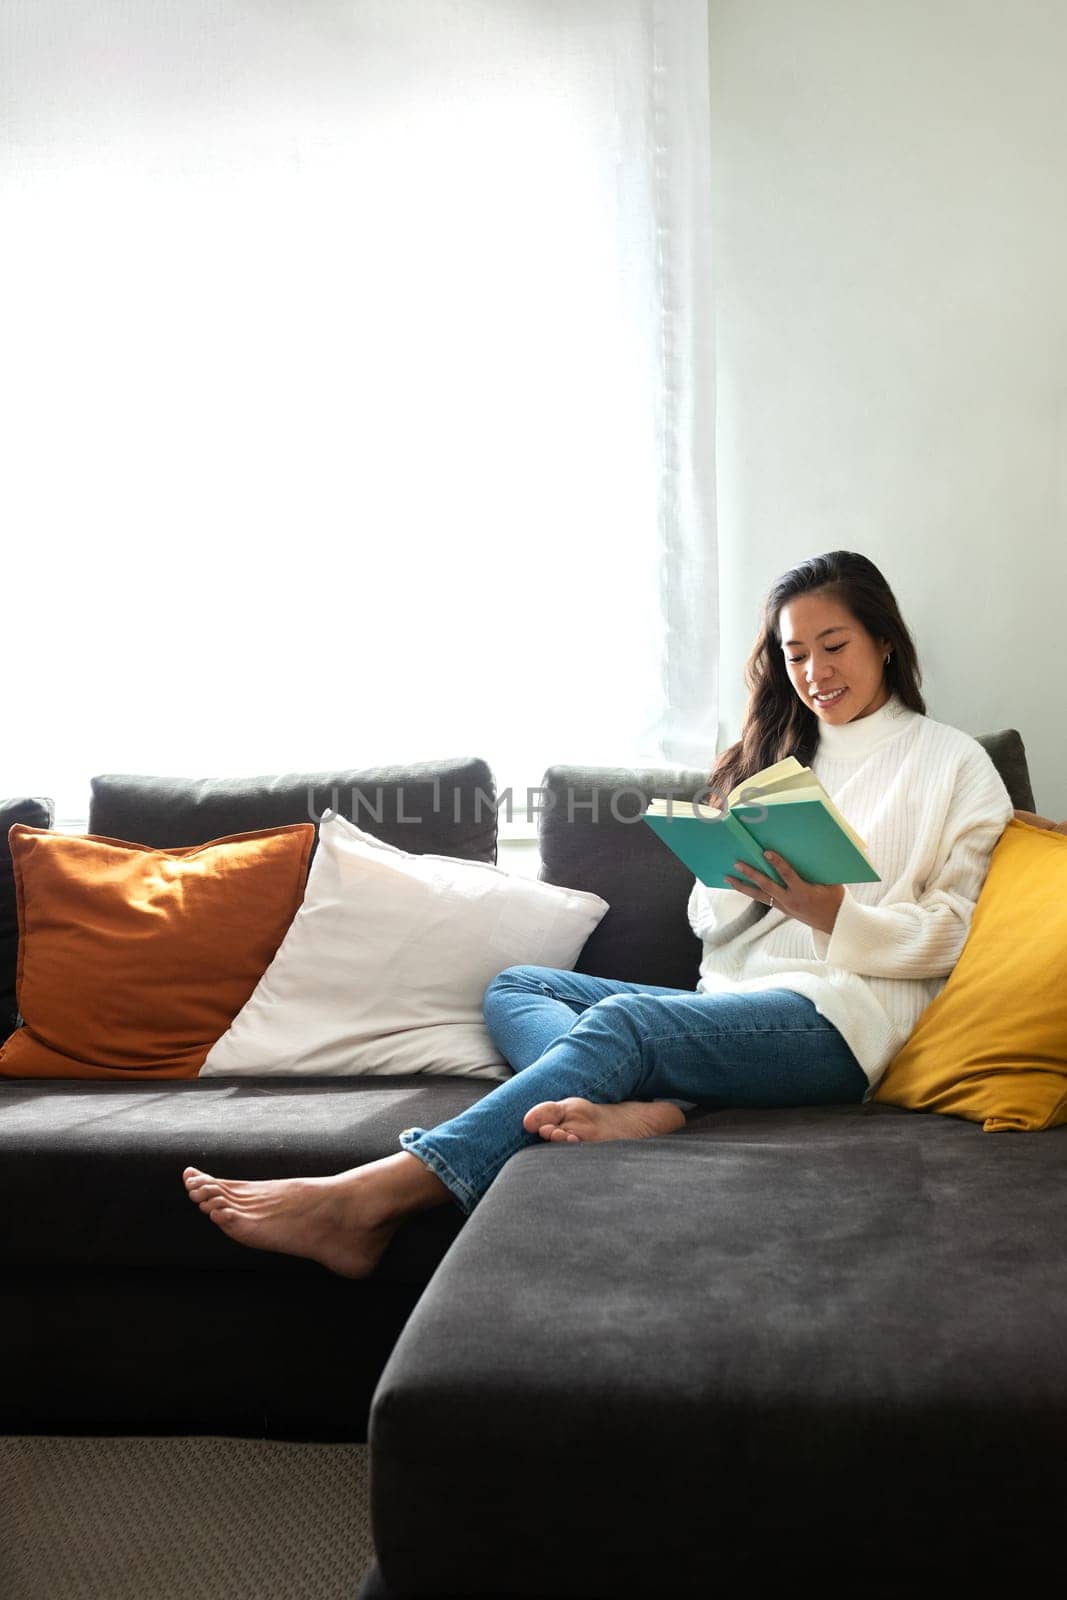 Portrait of happy, smiling Asian woman relaxing at home reading a book sitting on the sofa. Vertical image. Copy space. by Hoverstock